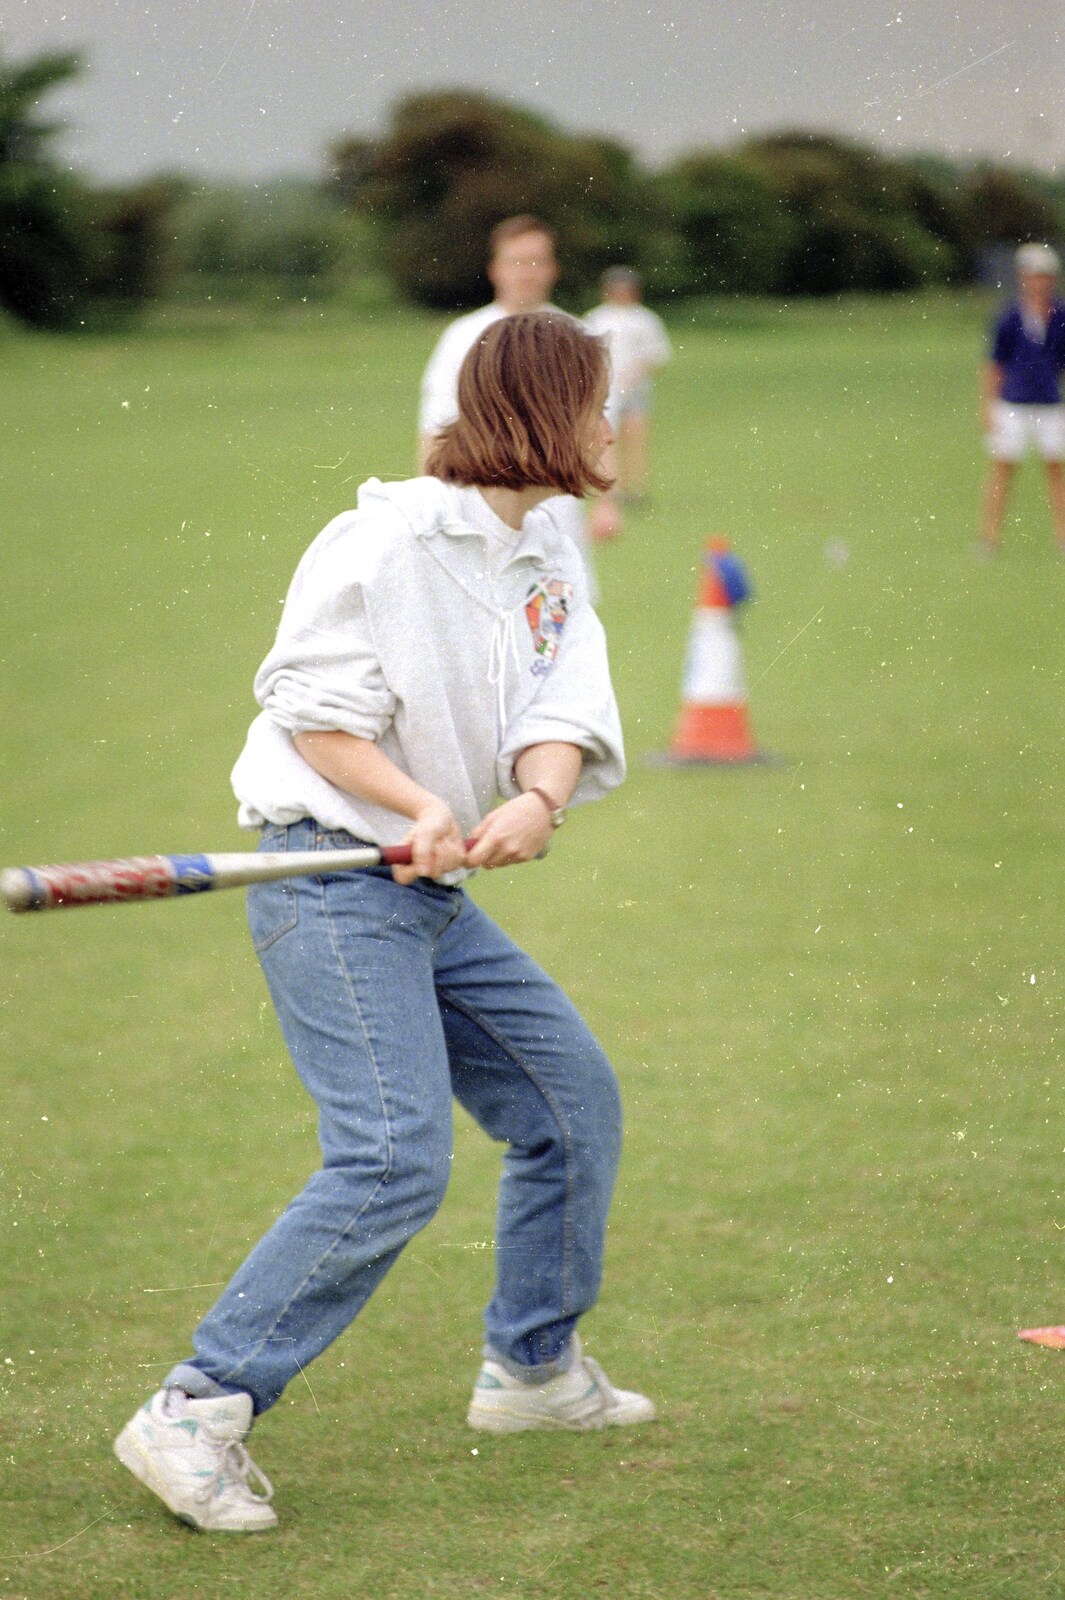 Clays Softball and Printec Reunion, Ditchingham and Stoke Ash, Suffolk - 2nd June 1994: Jo takes a swing